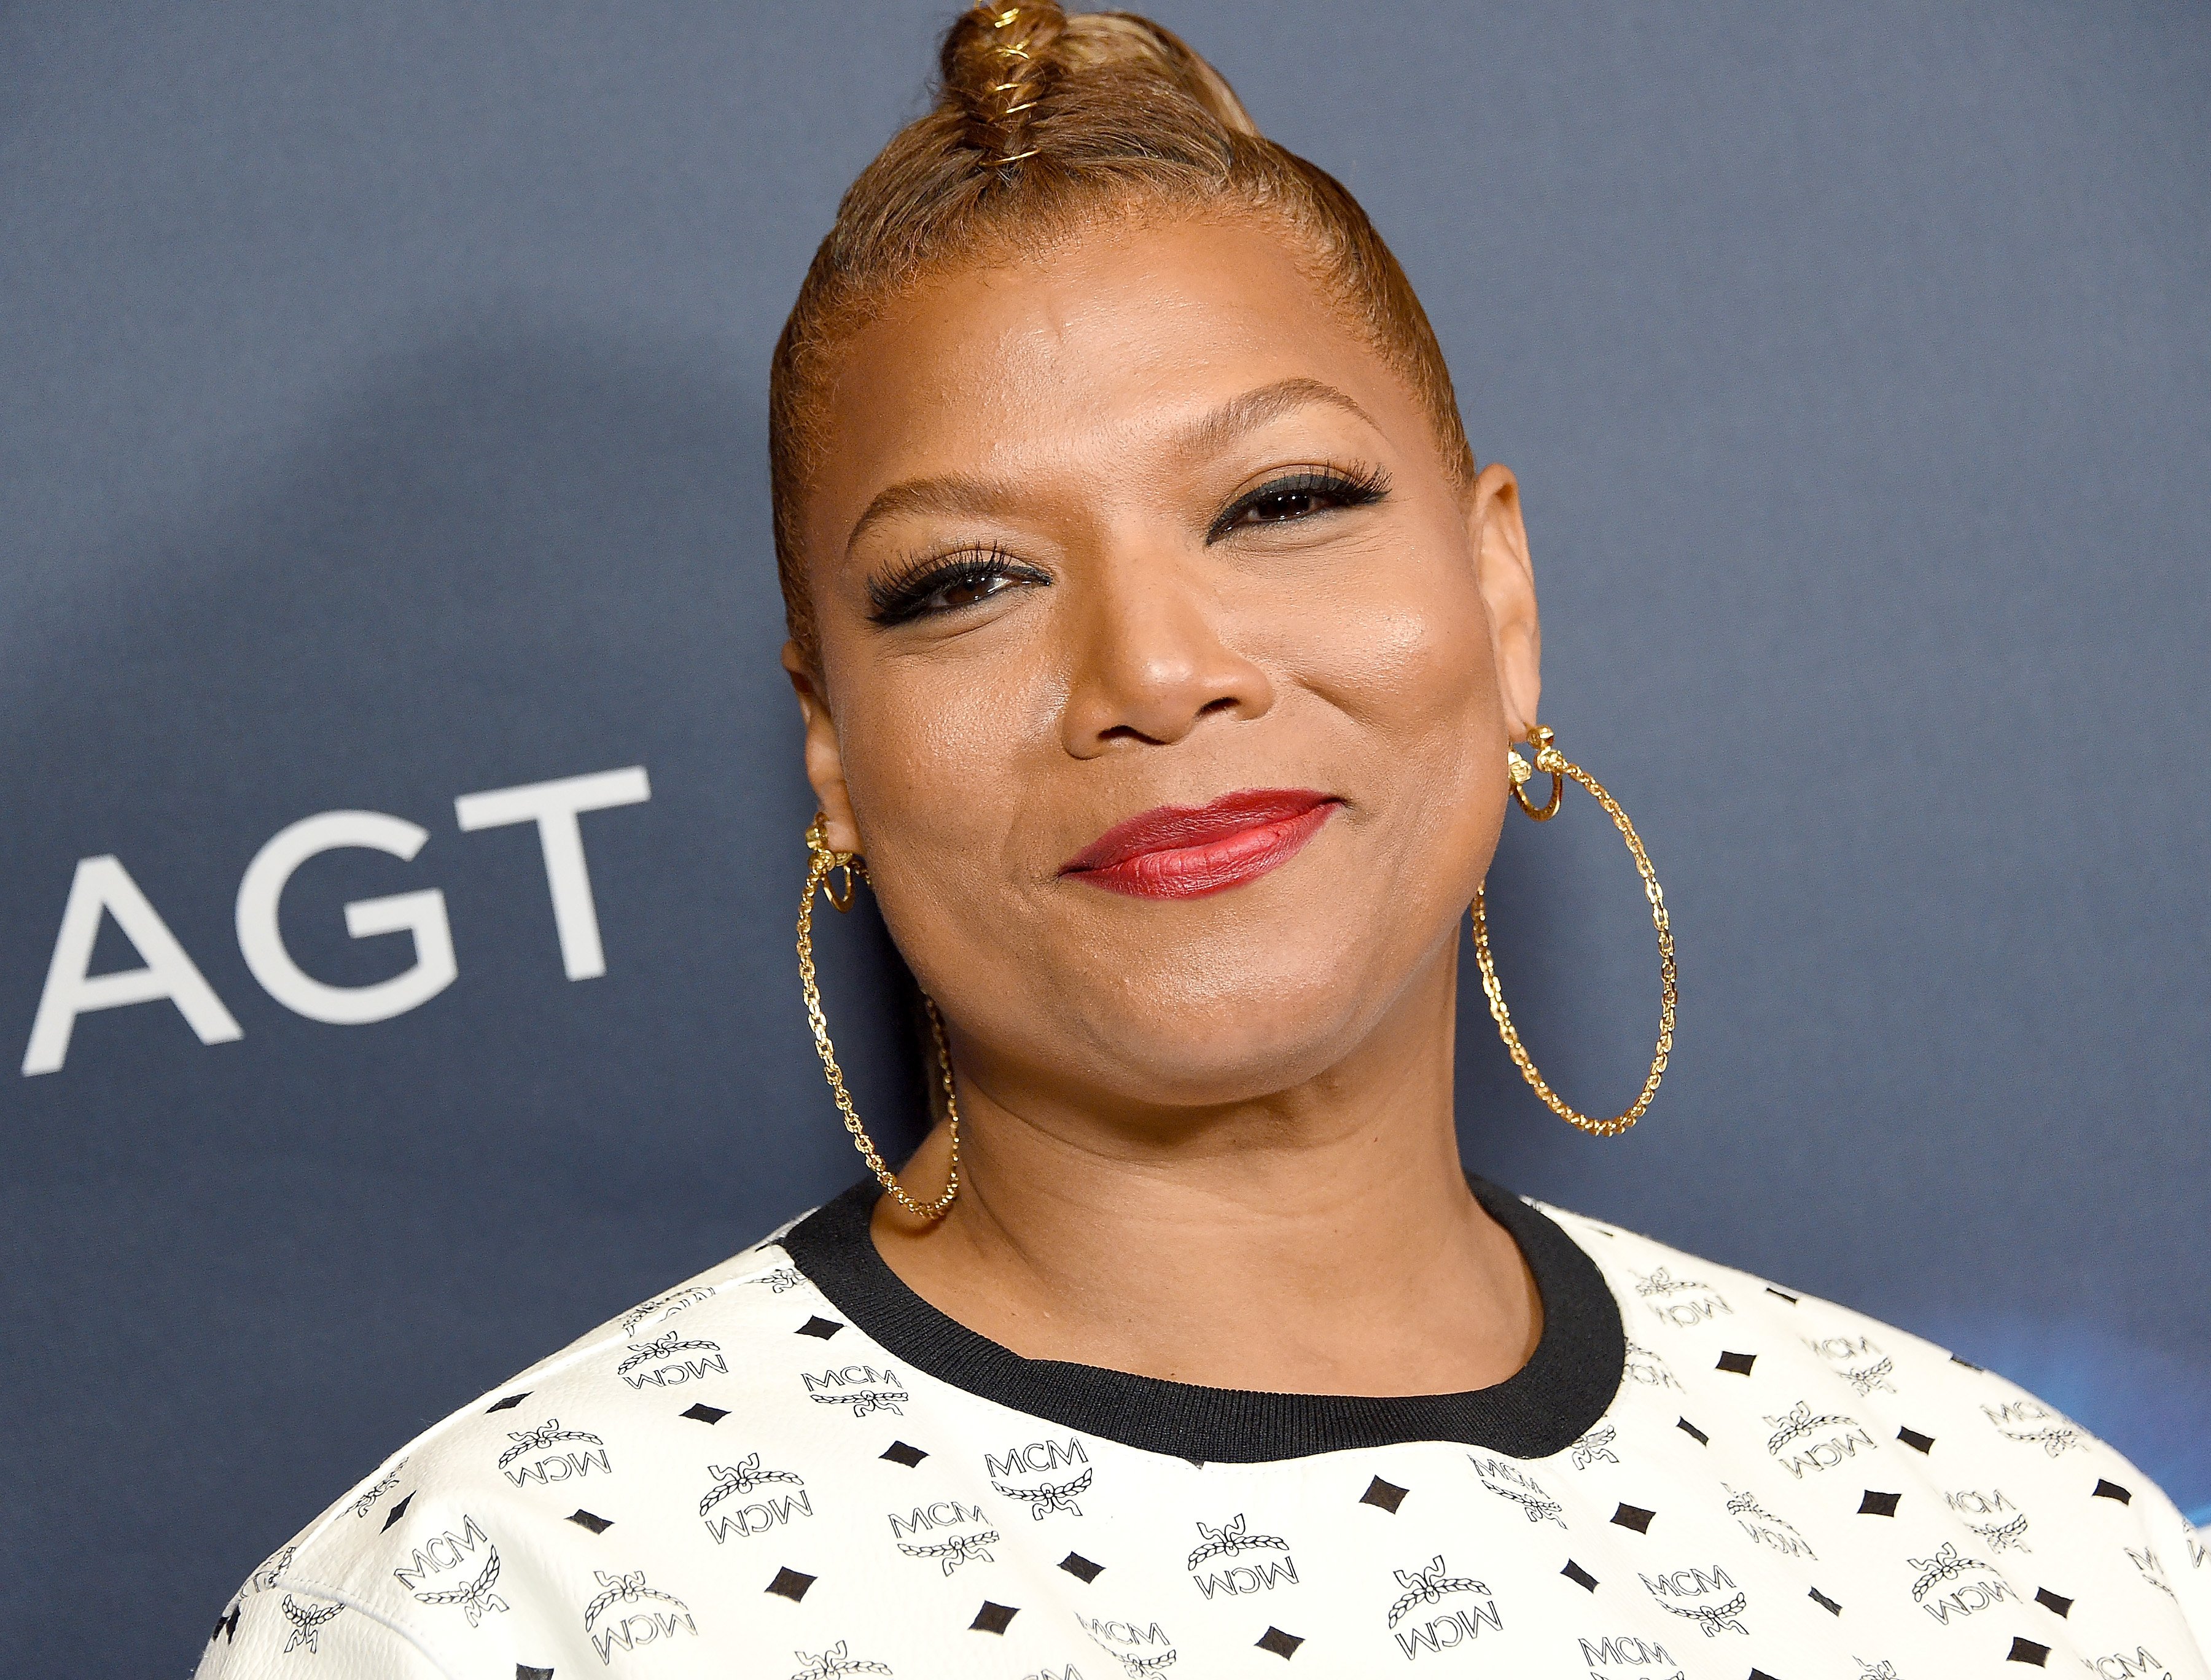 Queen Latifah smiling on the 'America's Got Talent' red carpet.